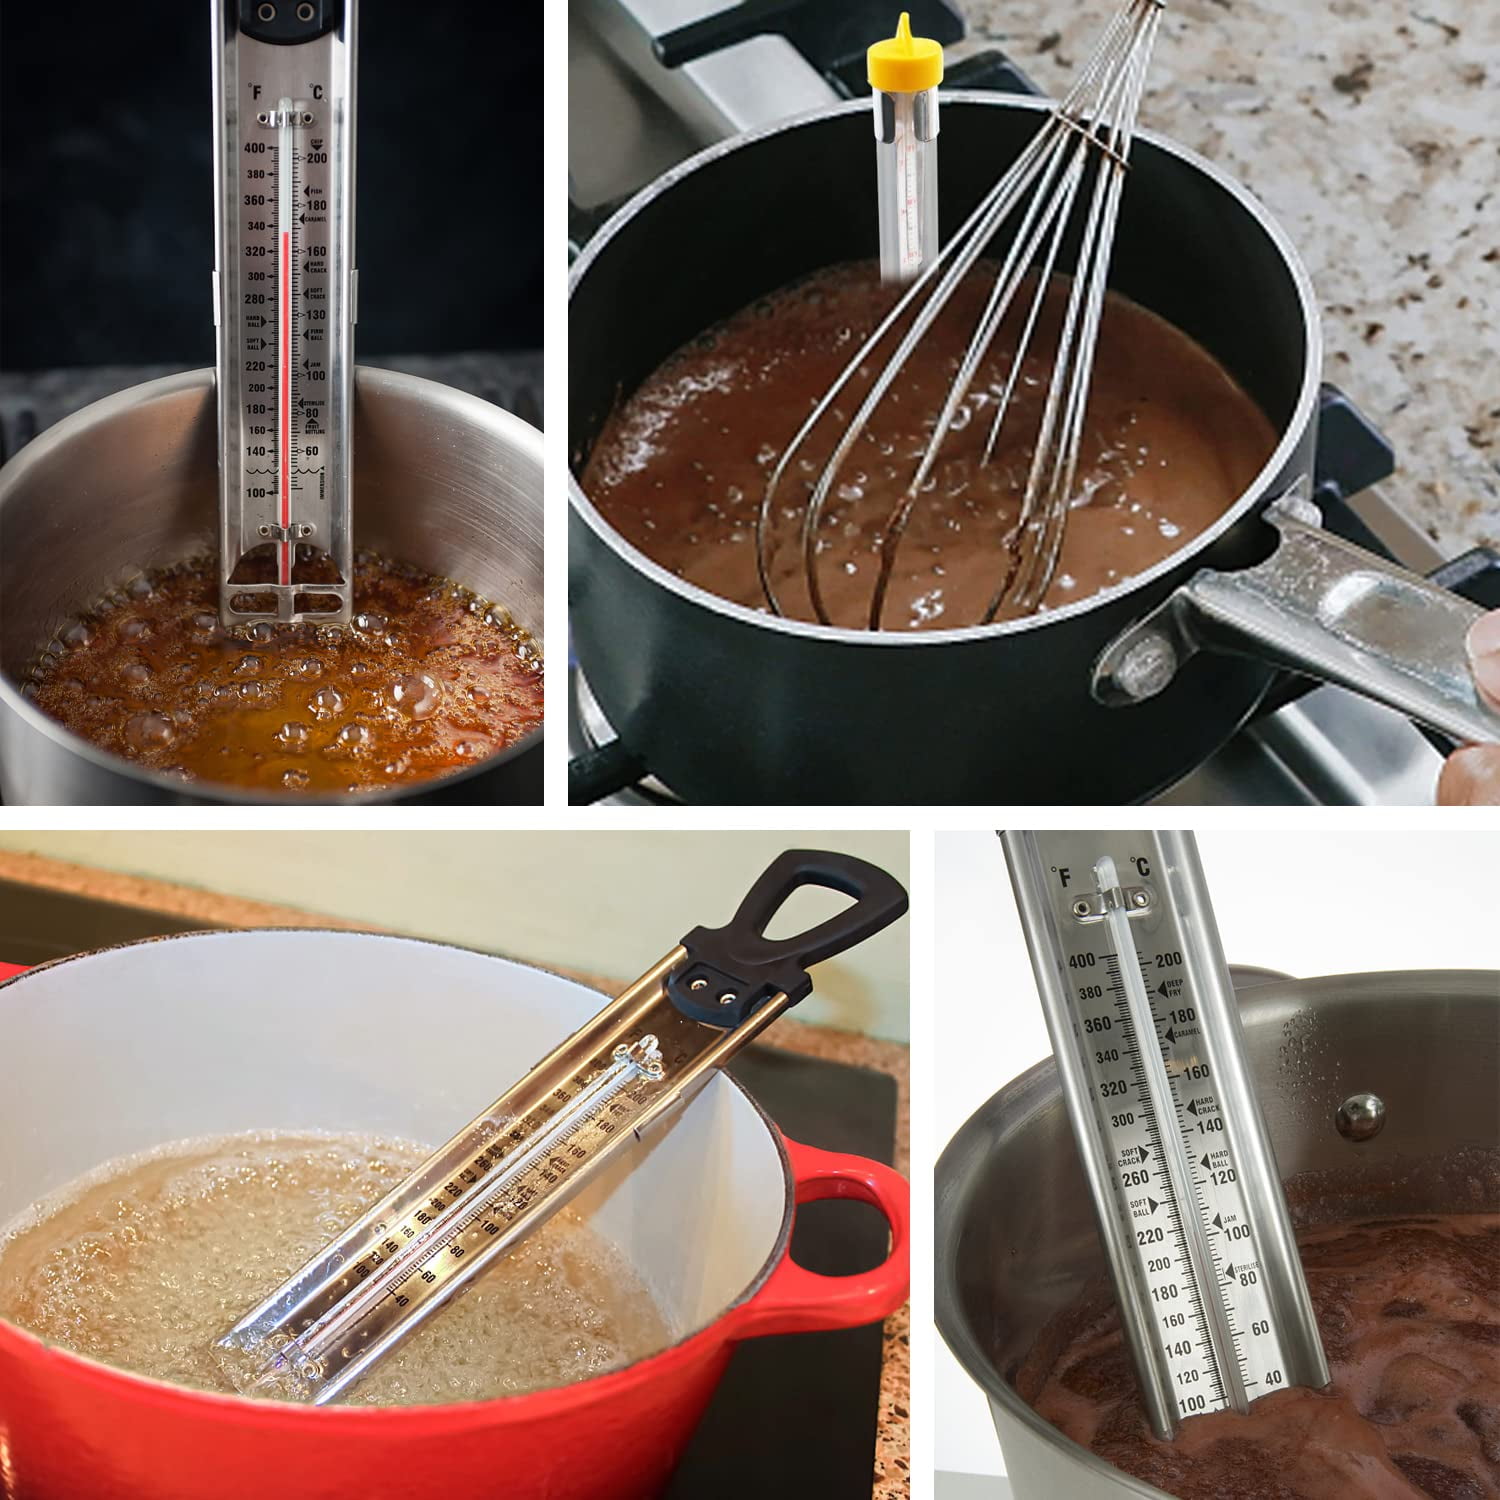 Candy / Deep Fry Dial Thermometer – KitchenSupply